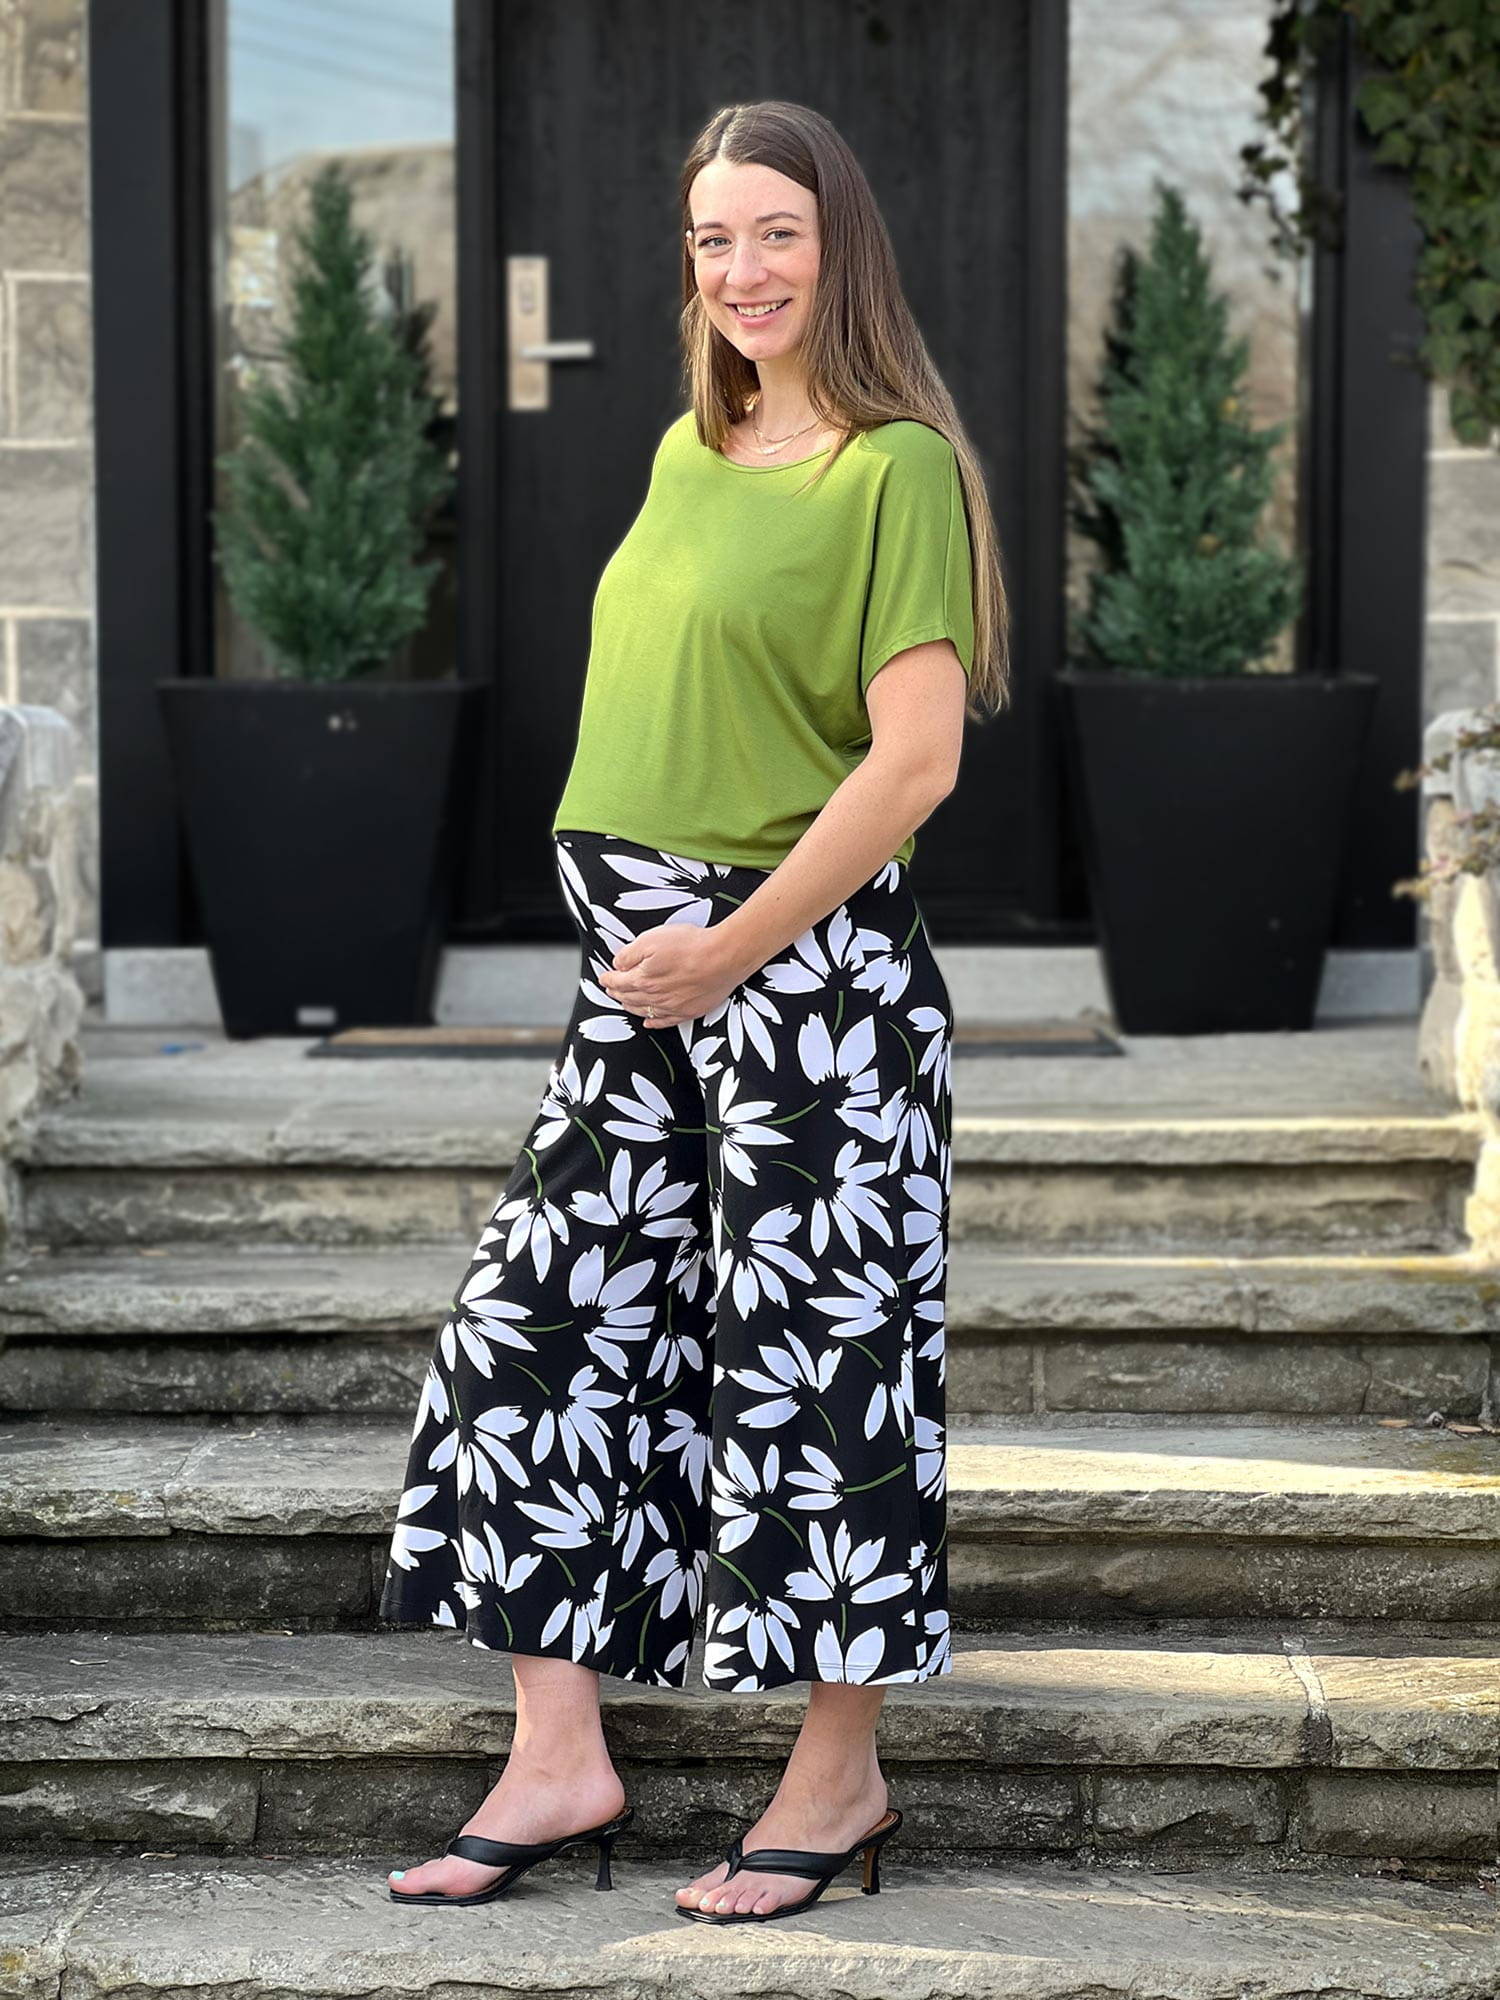 Pregnant woman standing wearing Miik's Keethai wide leg culotte in floral print with a green top.